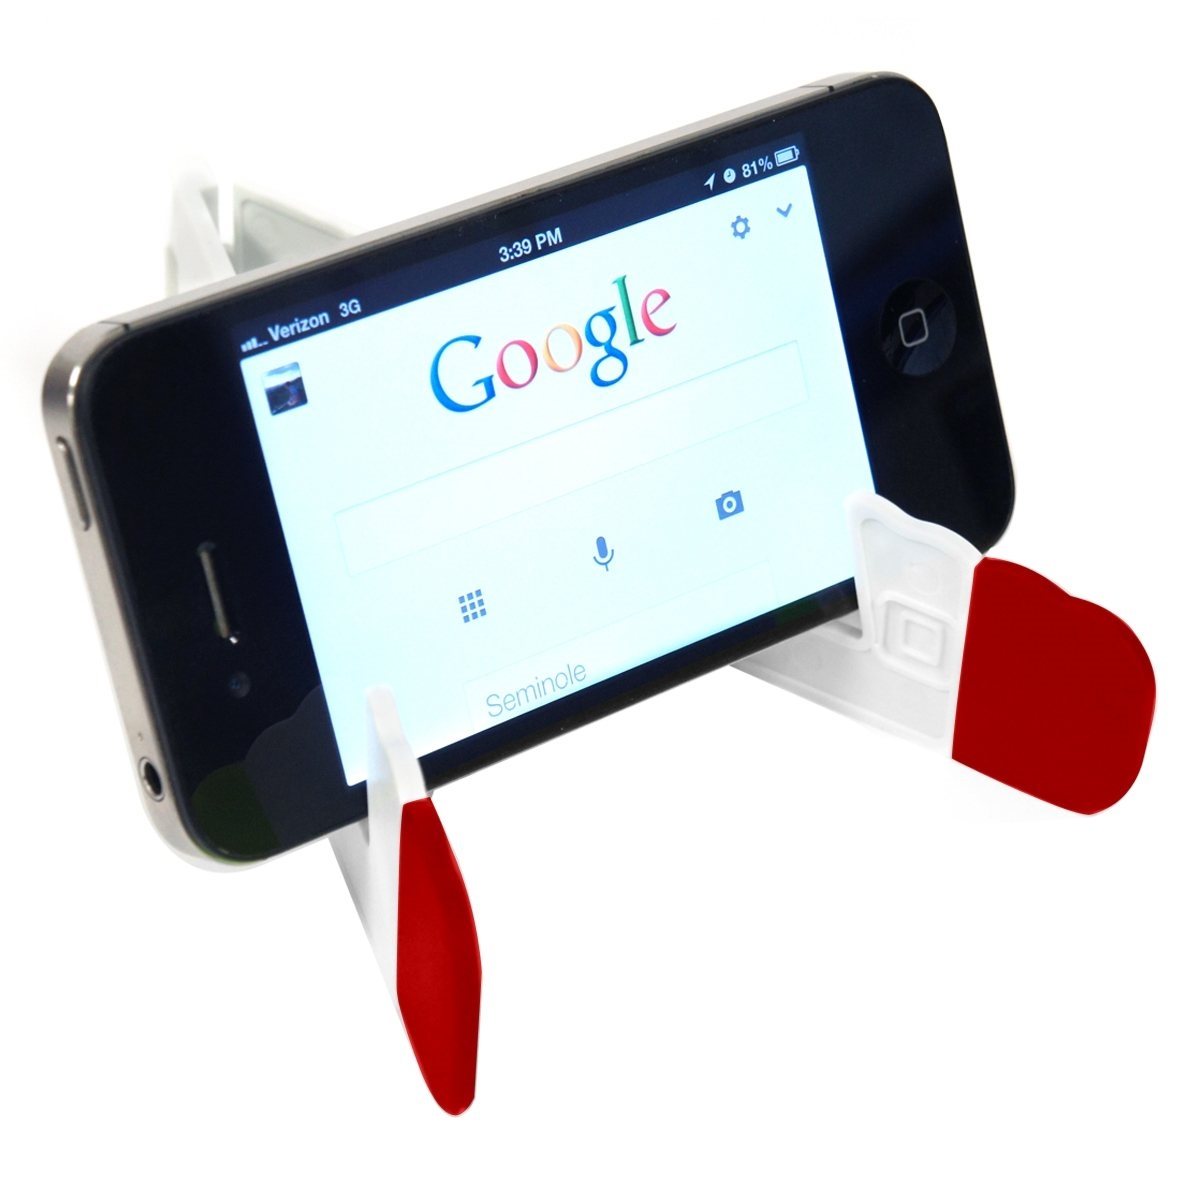 How Can I Get Personalized Phone Stands?